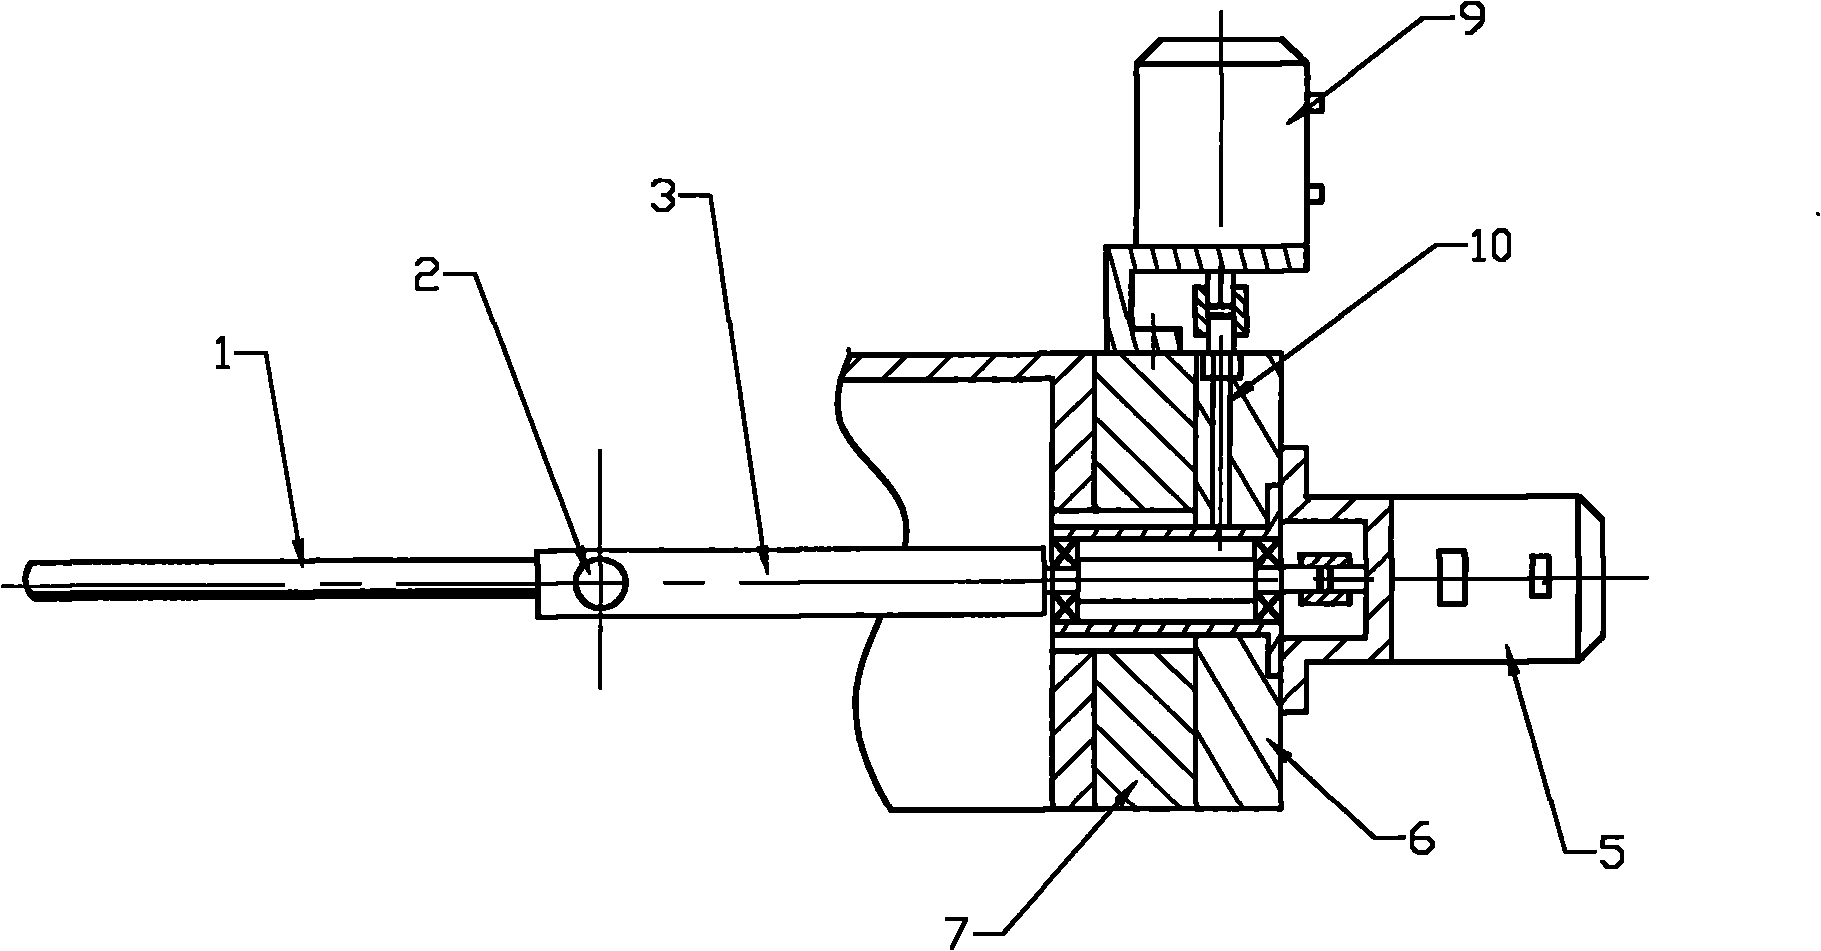 Numerical control groove grinding machine with numerical control grinding wheel trimming device